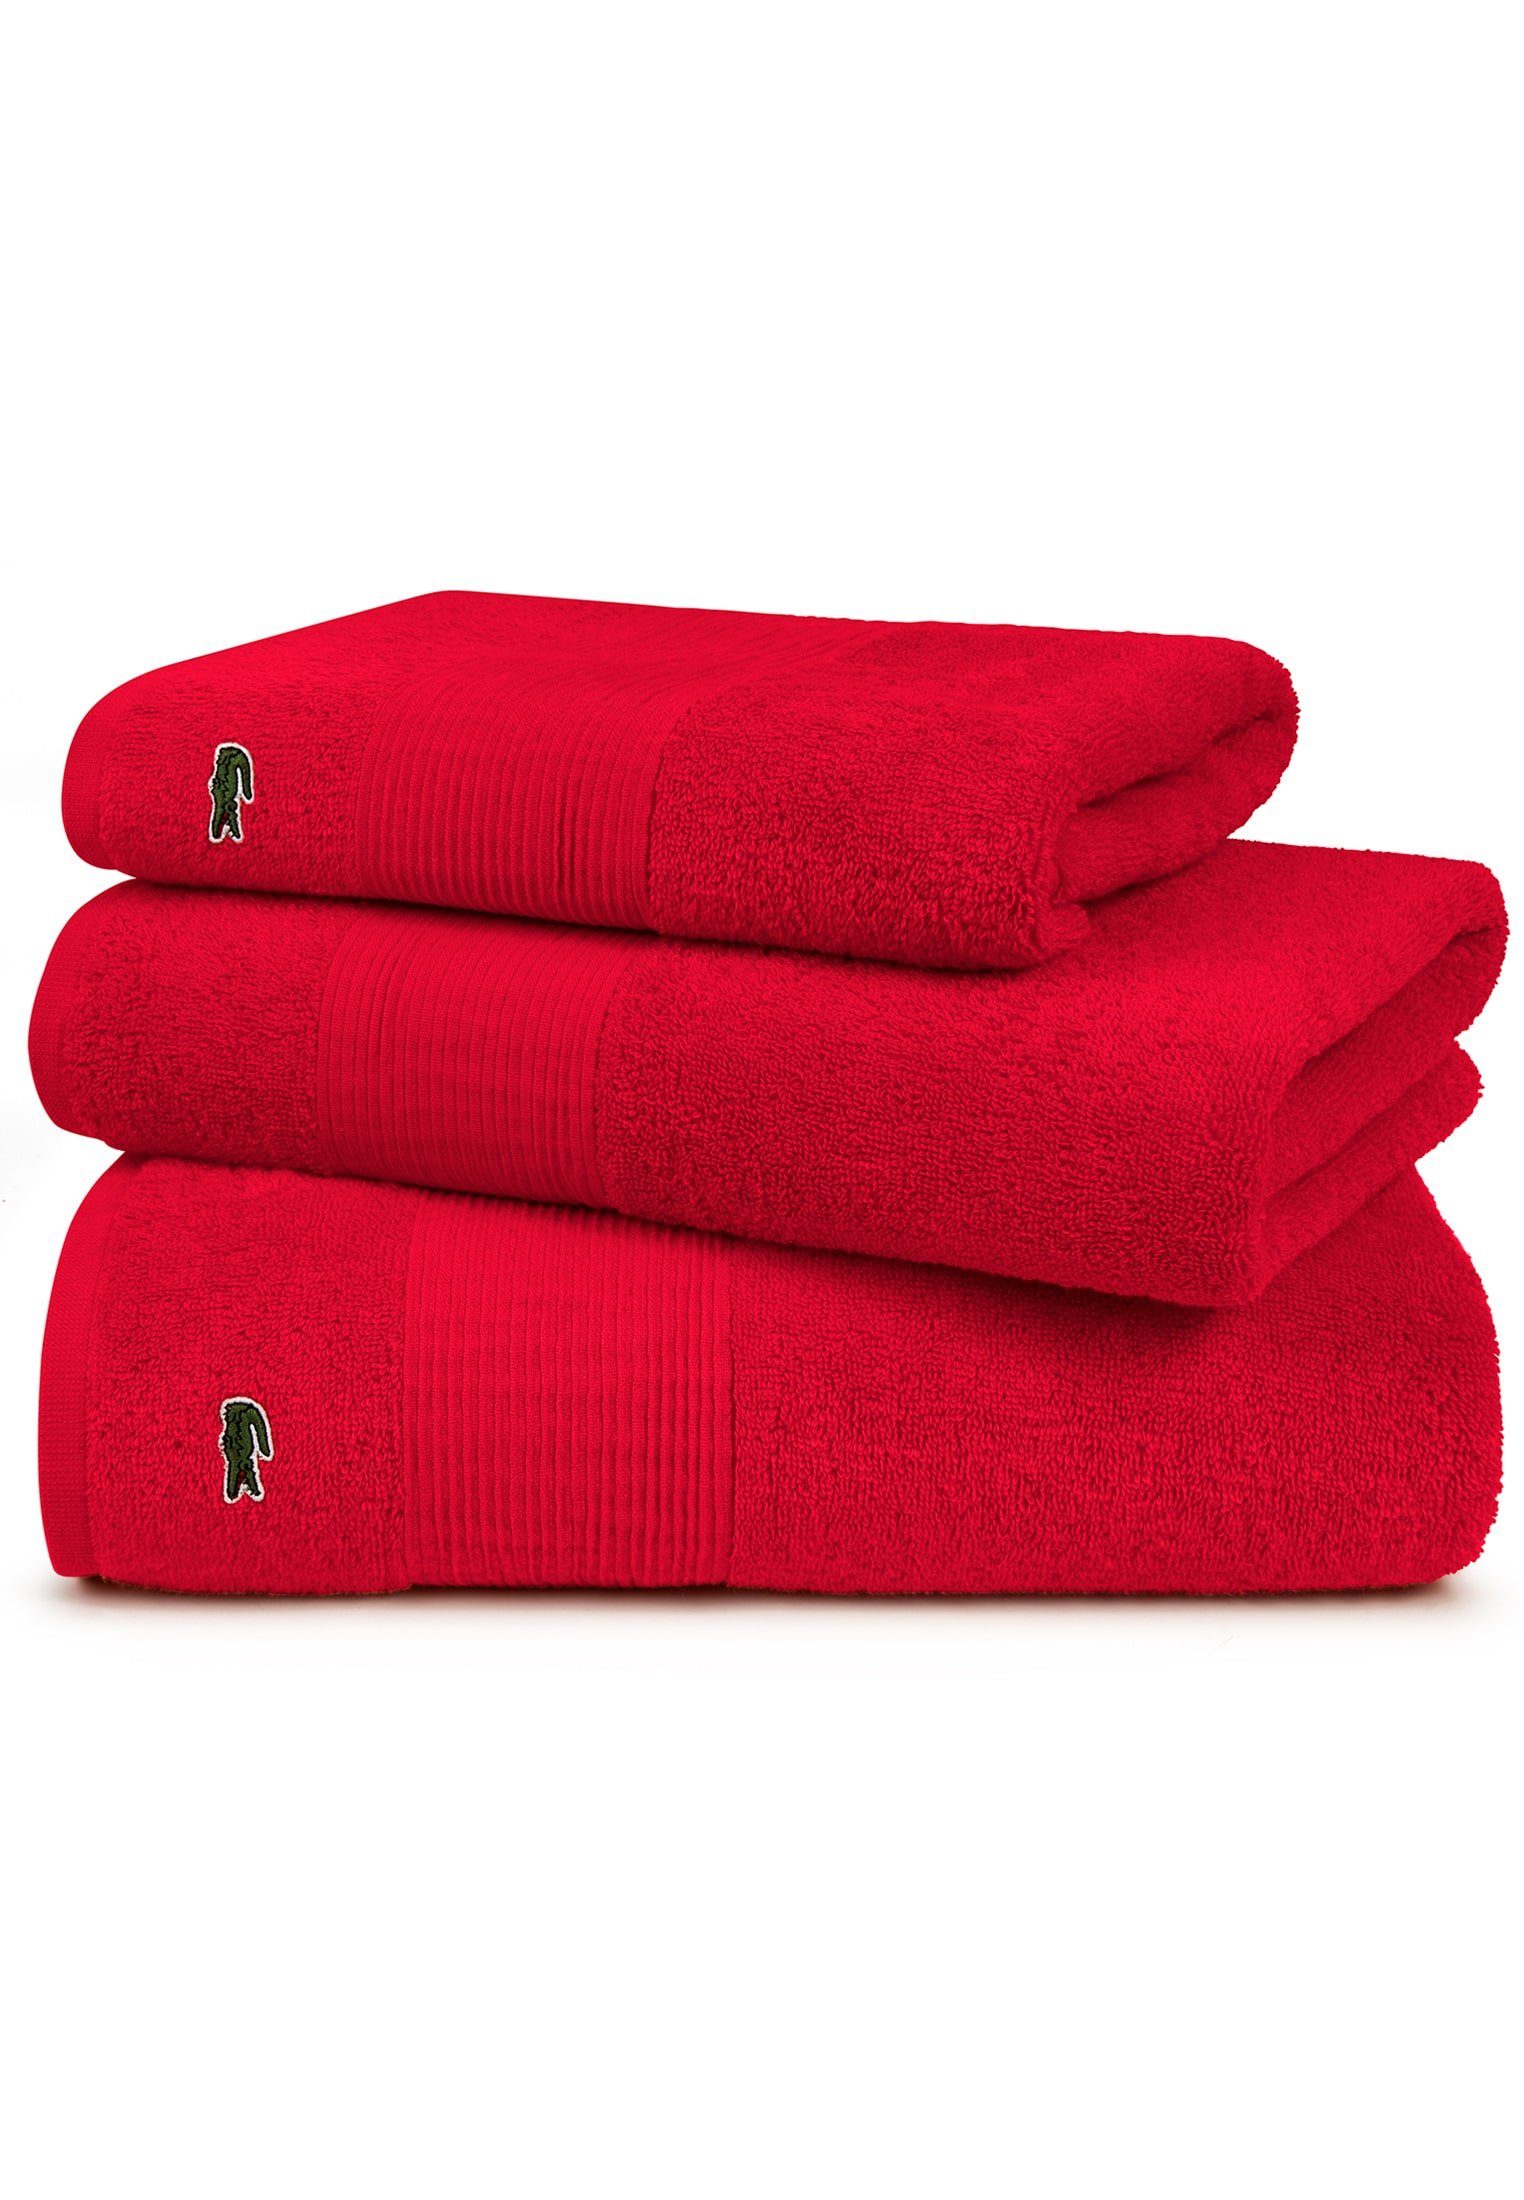 Lacoste Badetuch LE ROUGE 100% Baumwolle CROCO, L